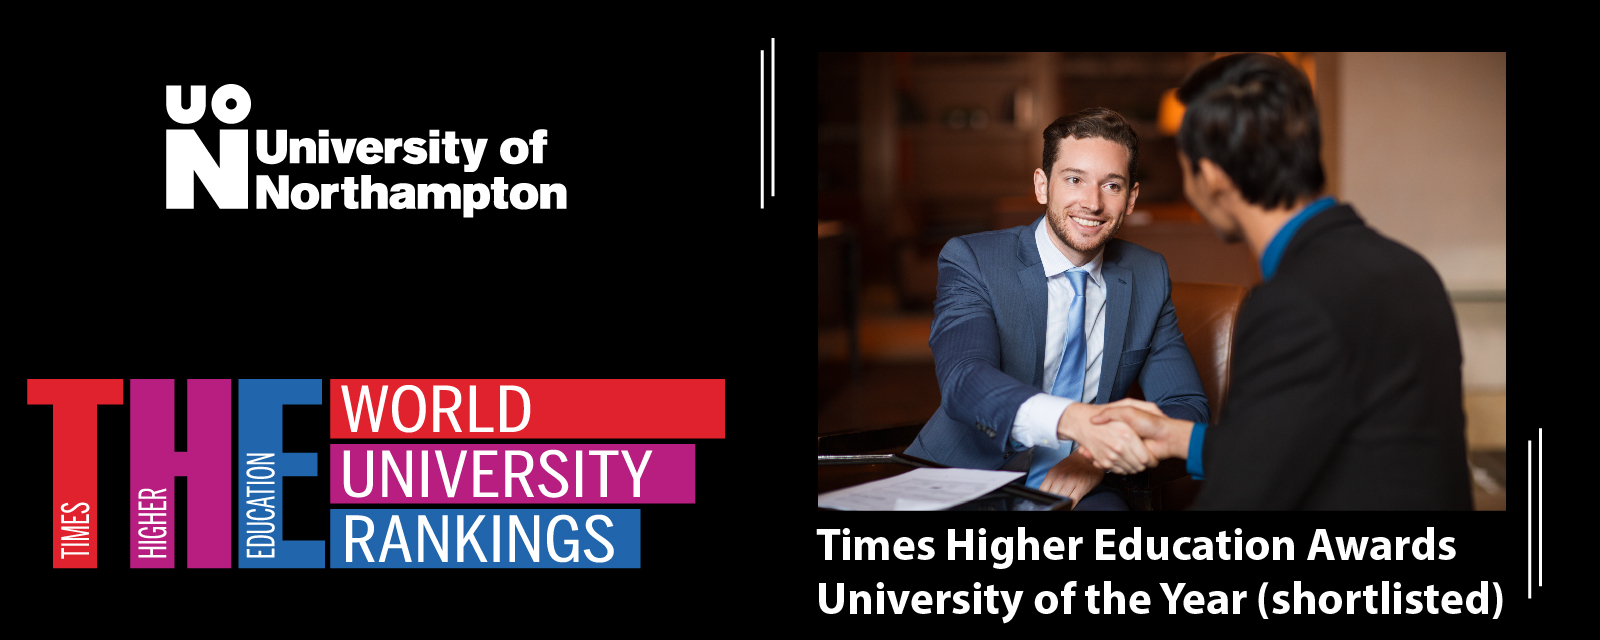 Times Higher Education Awards University of the Year (shortlisted)